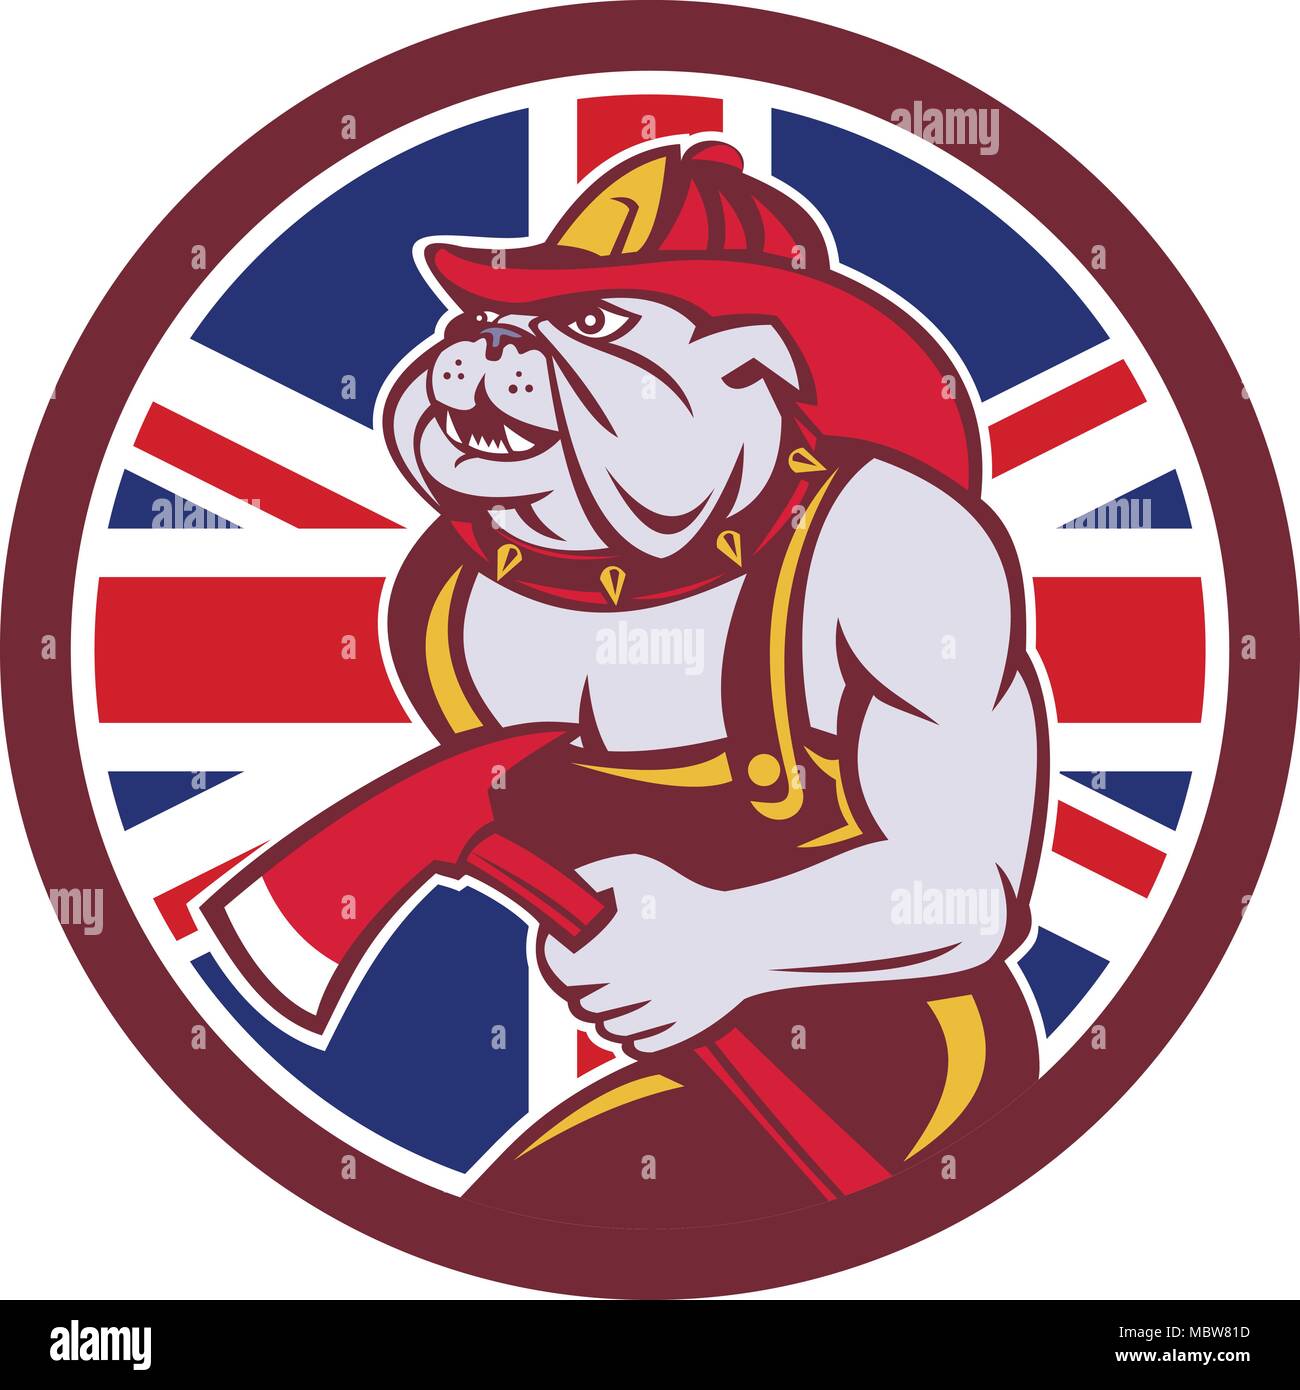 Icon retro style illustration of a British Bulldog fireman or firefighter holding fire axe  with United Kingdom UK, Great Britain Union Jack flag set  Stock Vector